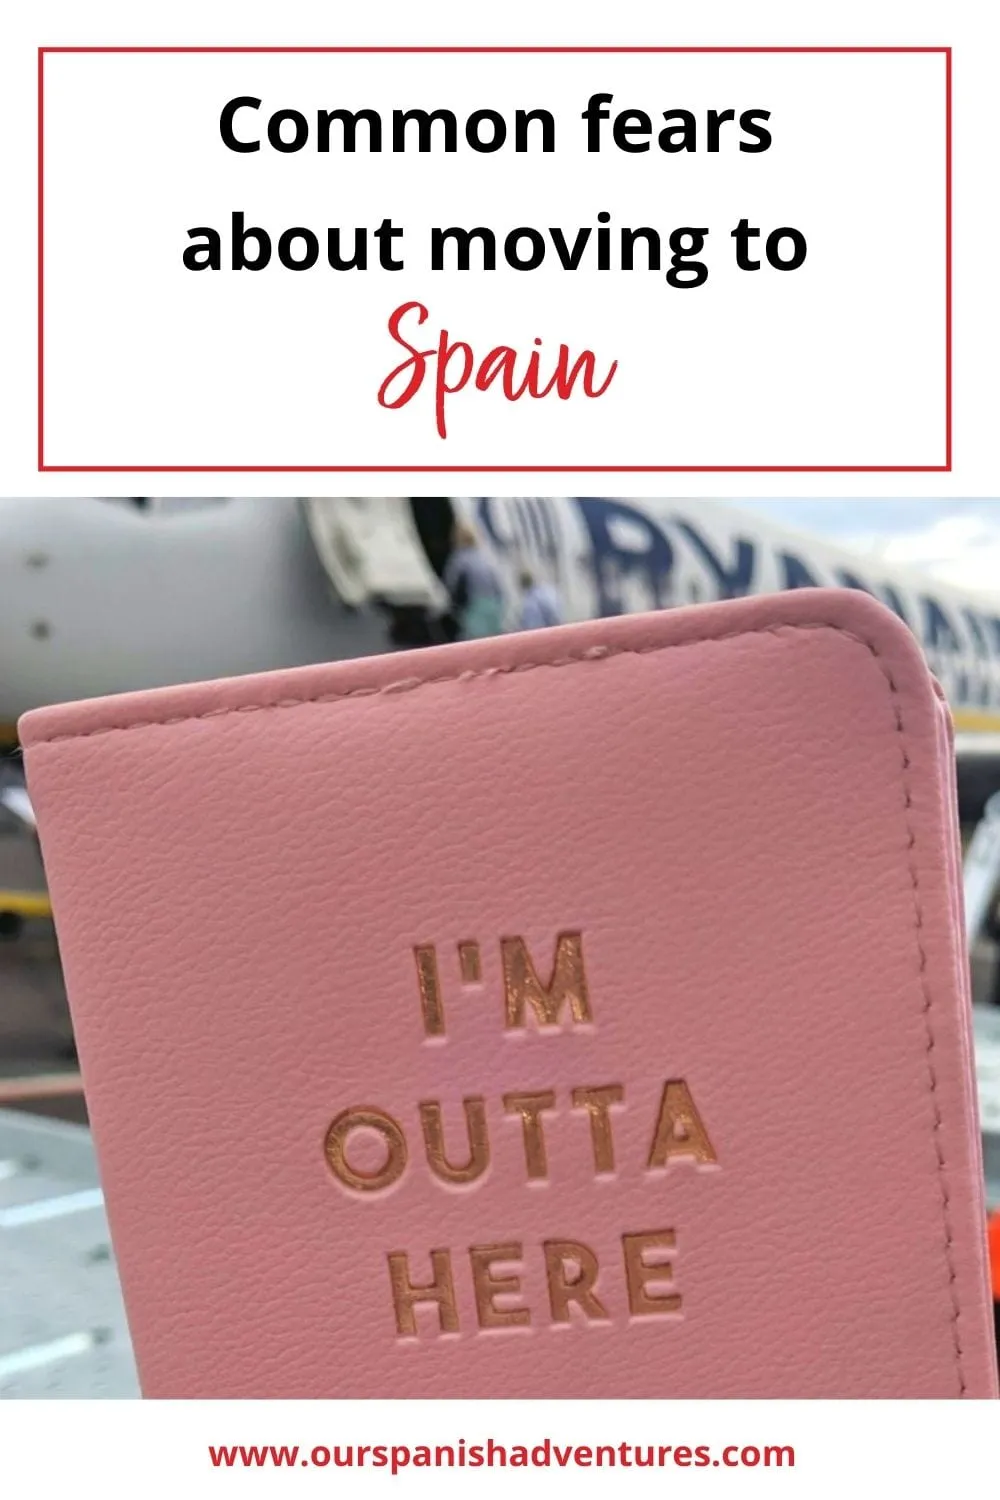 Common fears about moving to Spain | Our Spanish Adventures